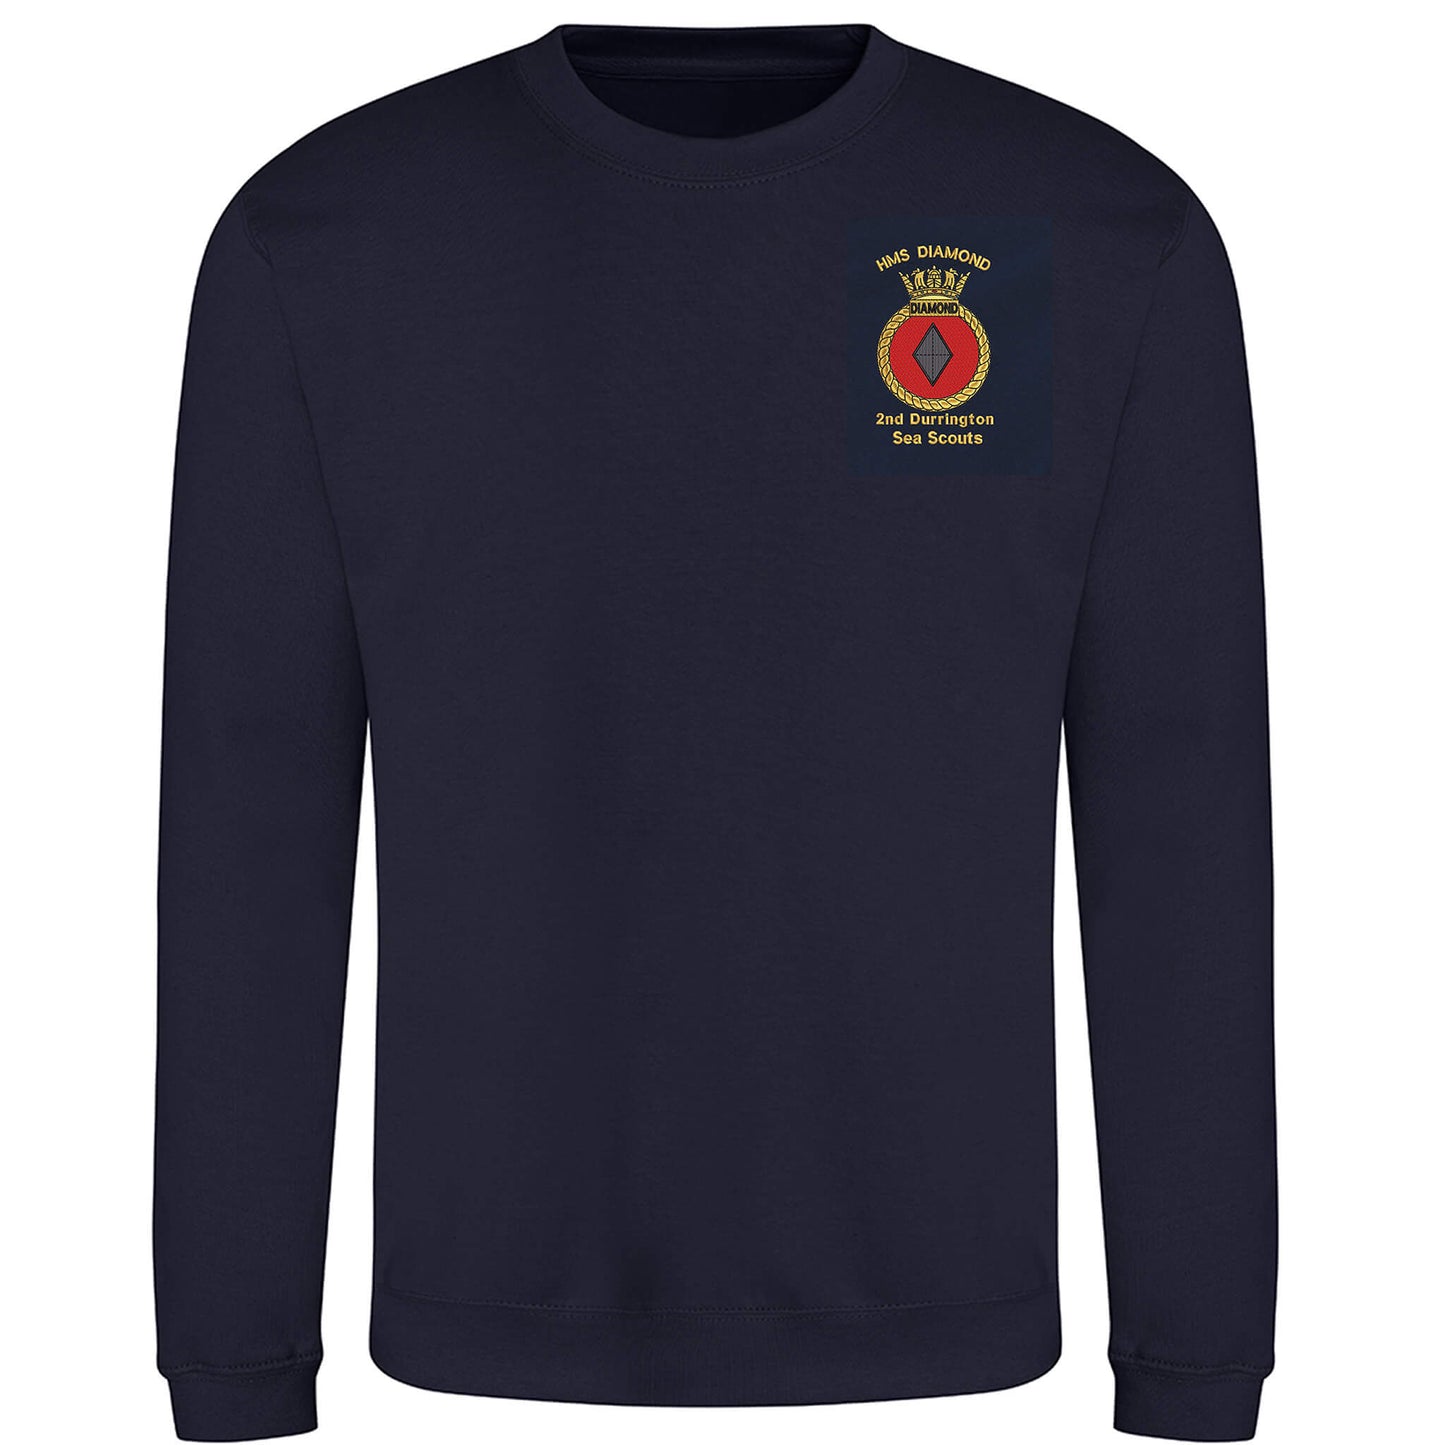 2ND DURRINGTON SEA SCOUTS SECTION LEADERS EMBROIDERED SWEAT SHIRT - Flamingo Rock®